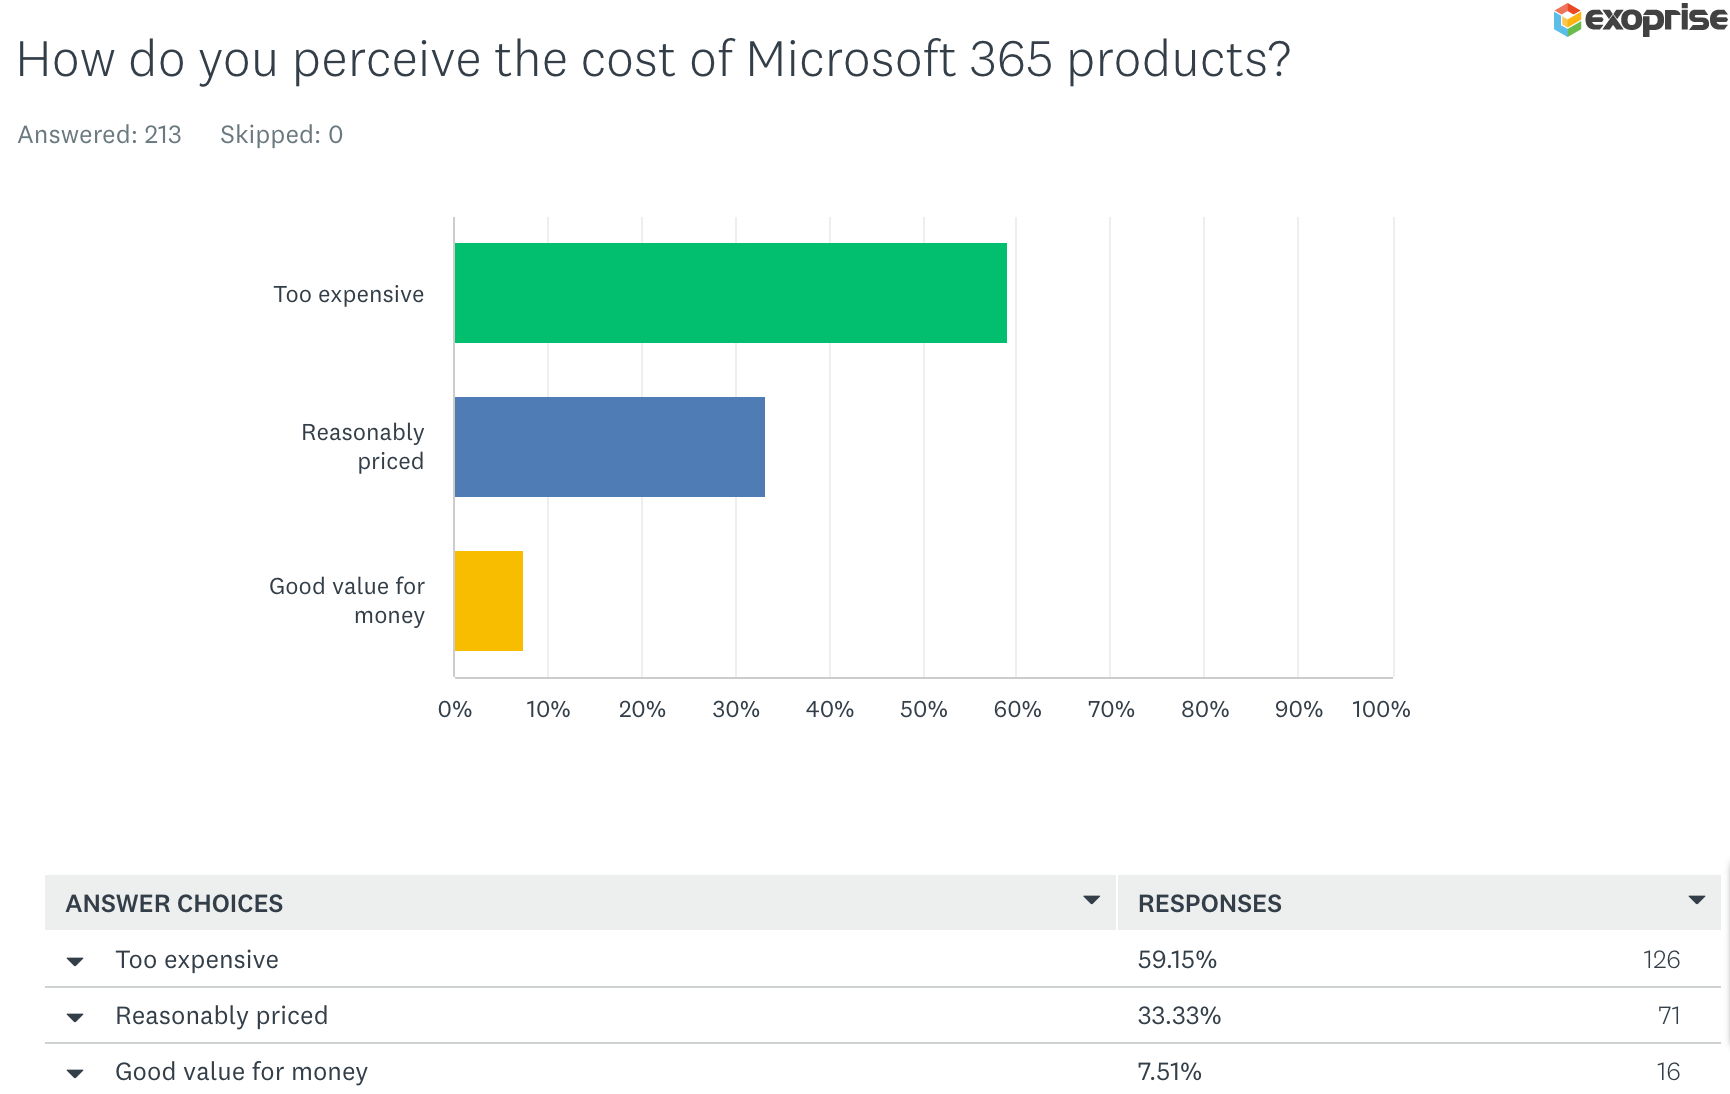 How do you perceive the cost of Microsoft 365 products?